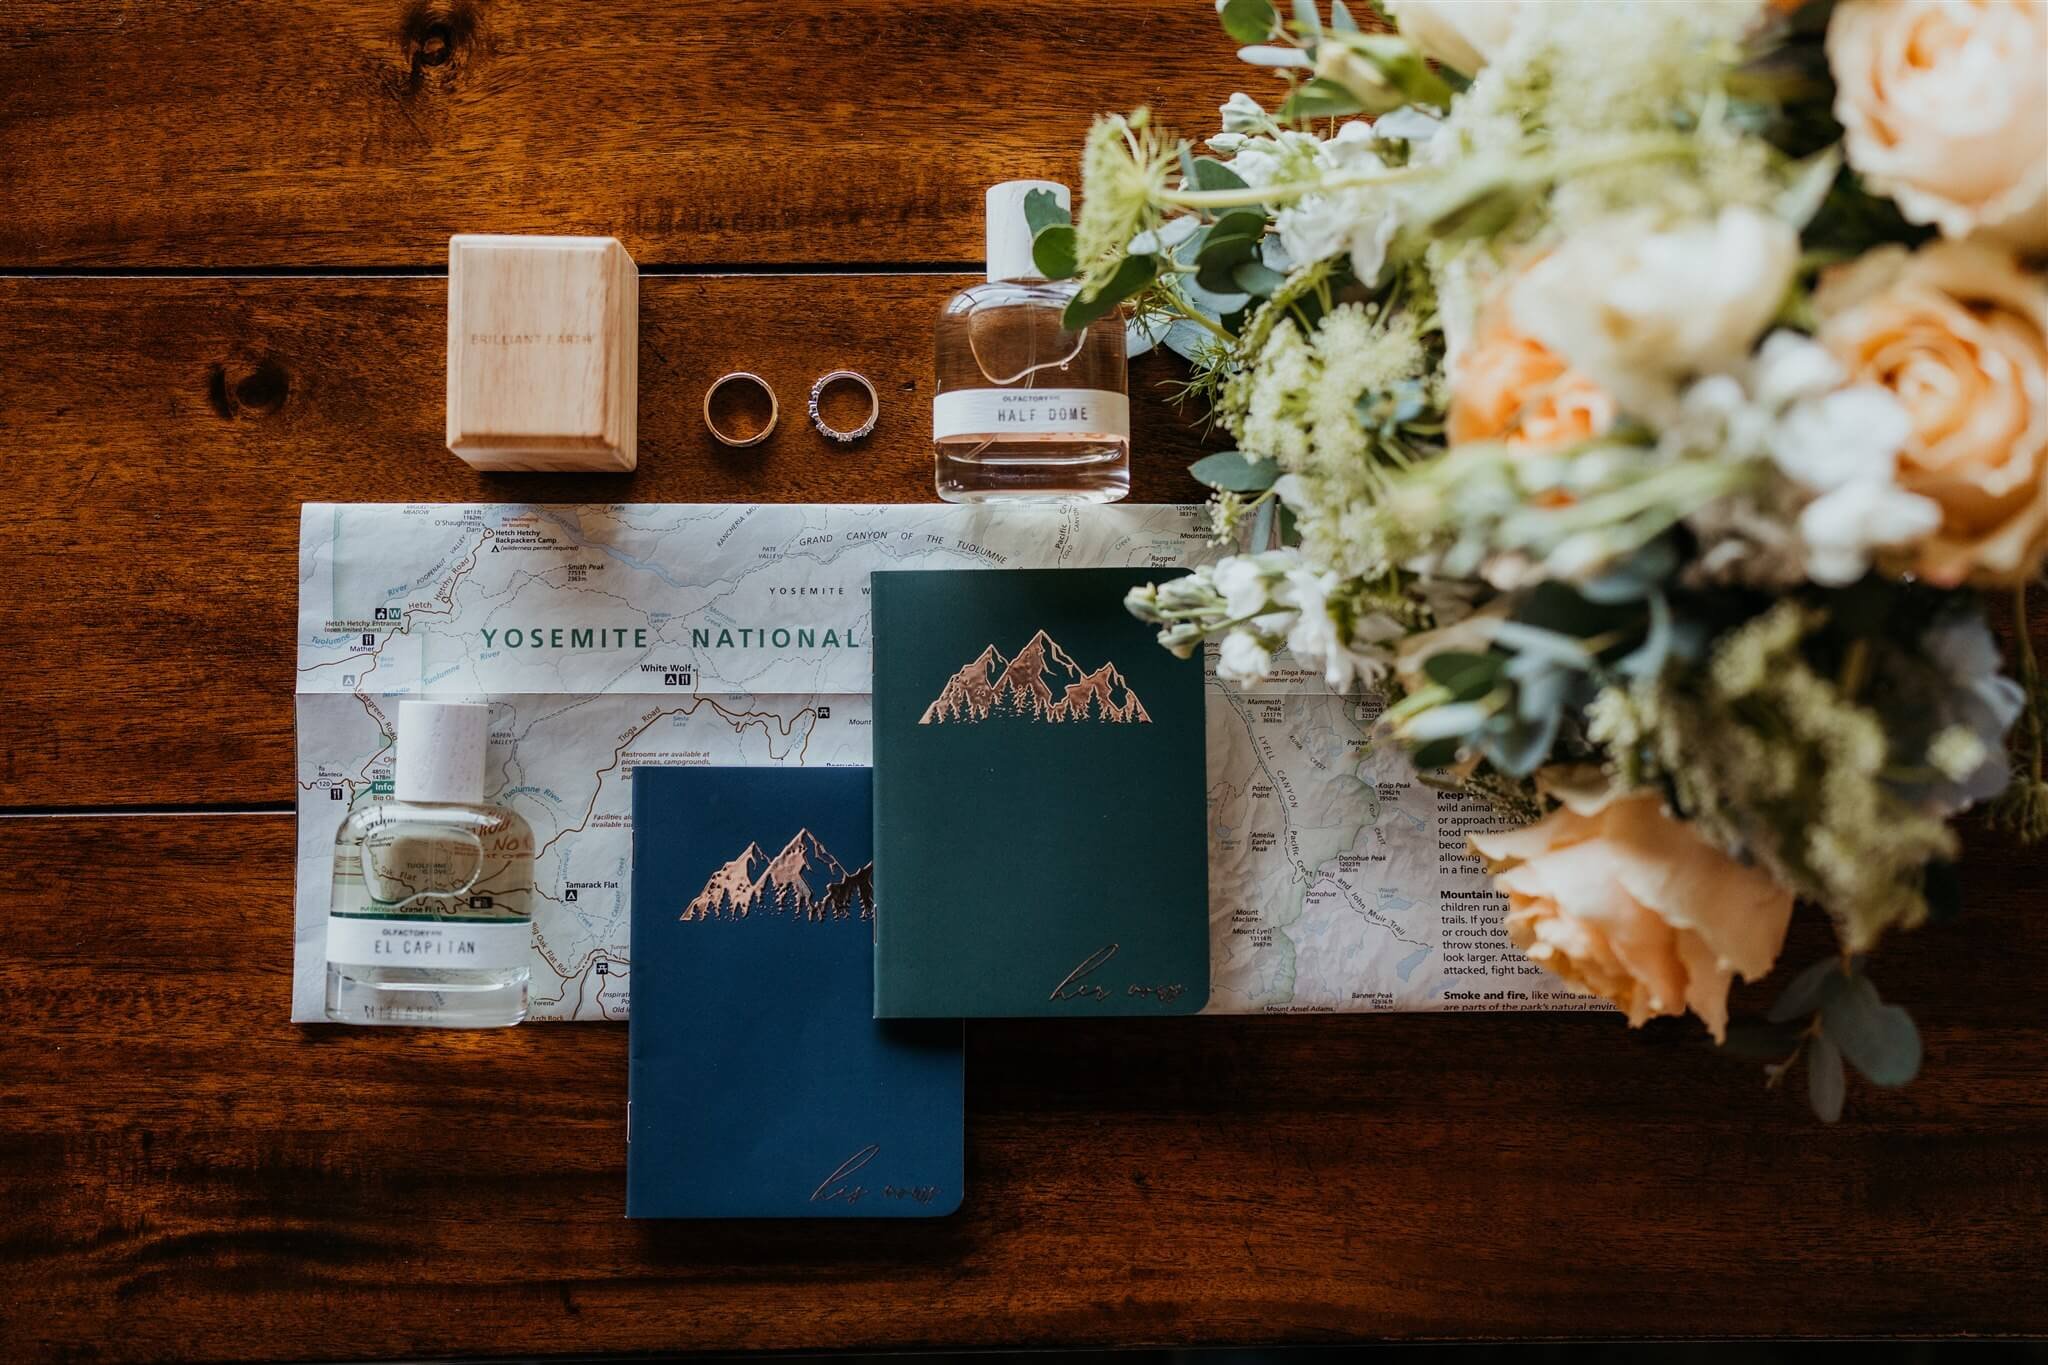 Yosemite elopement details with orange, white, and green floral arrangement and gold etched vow books